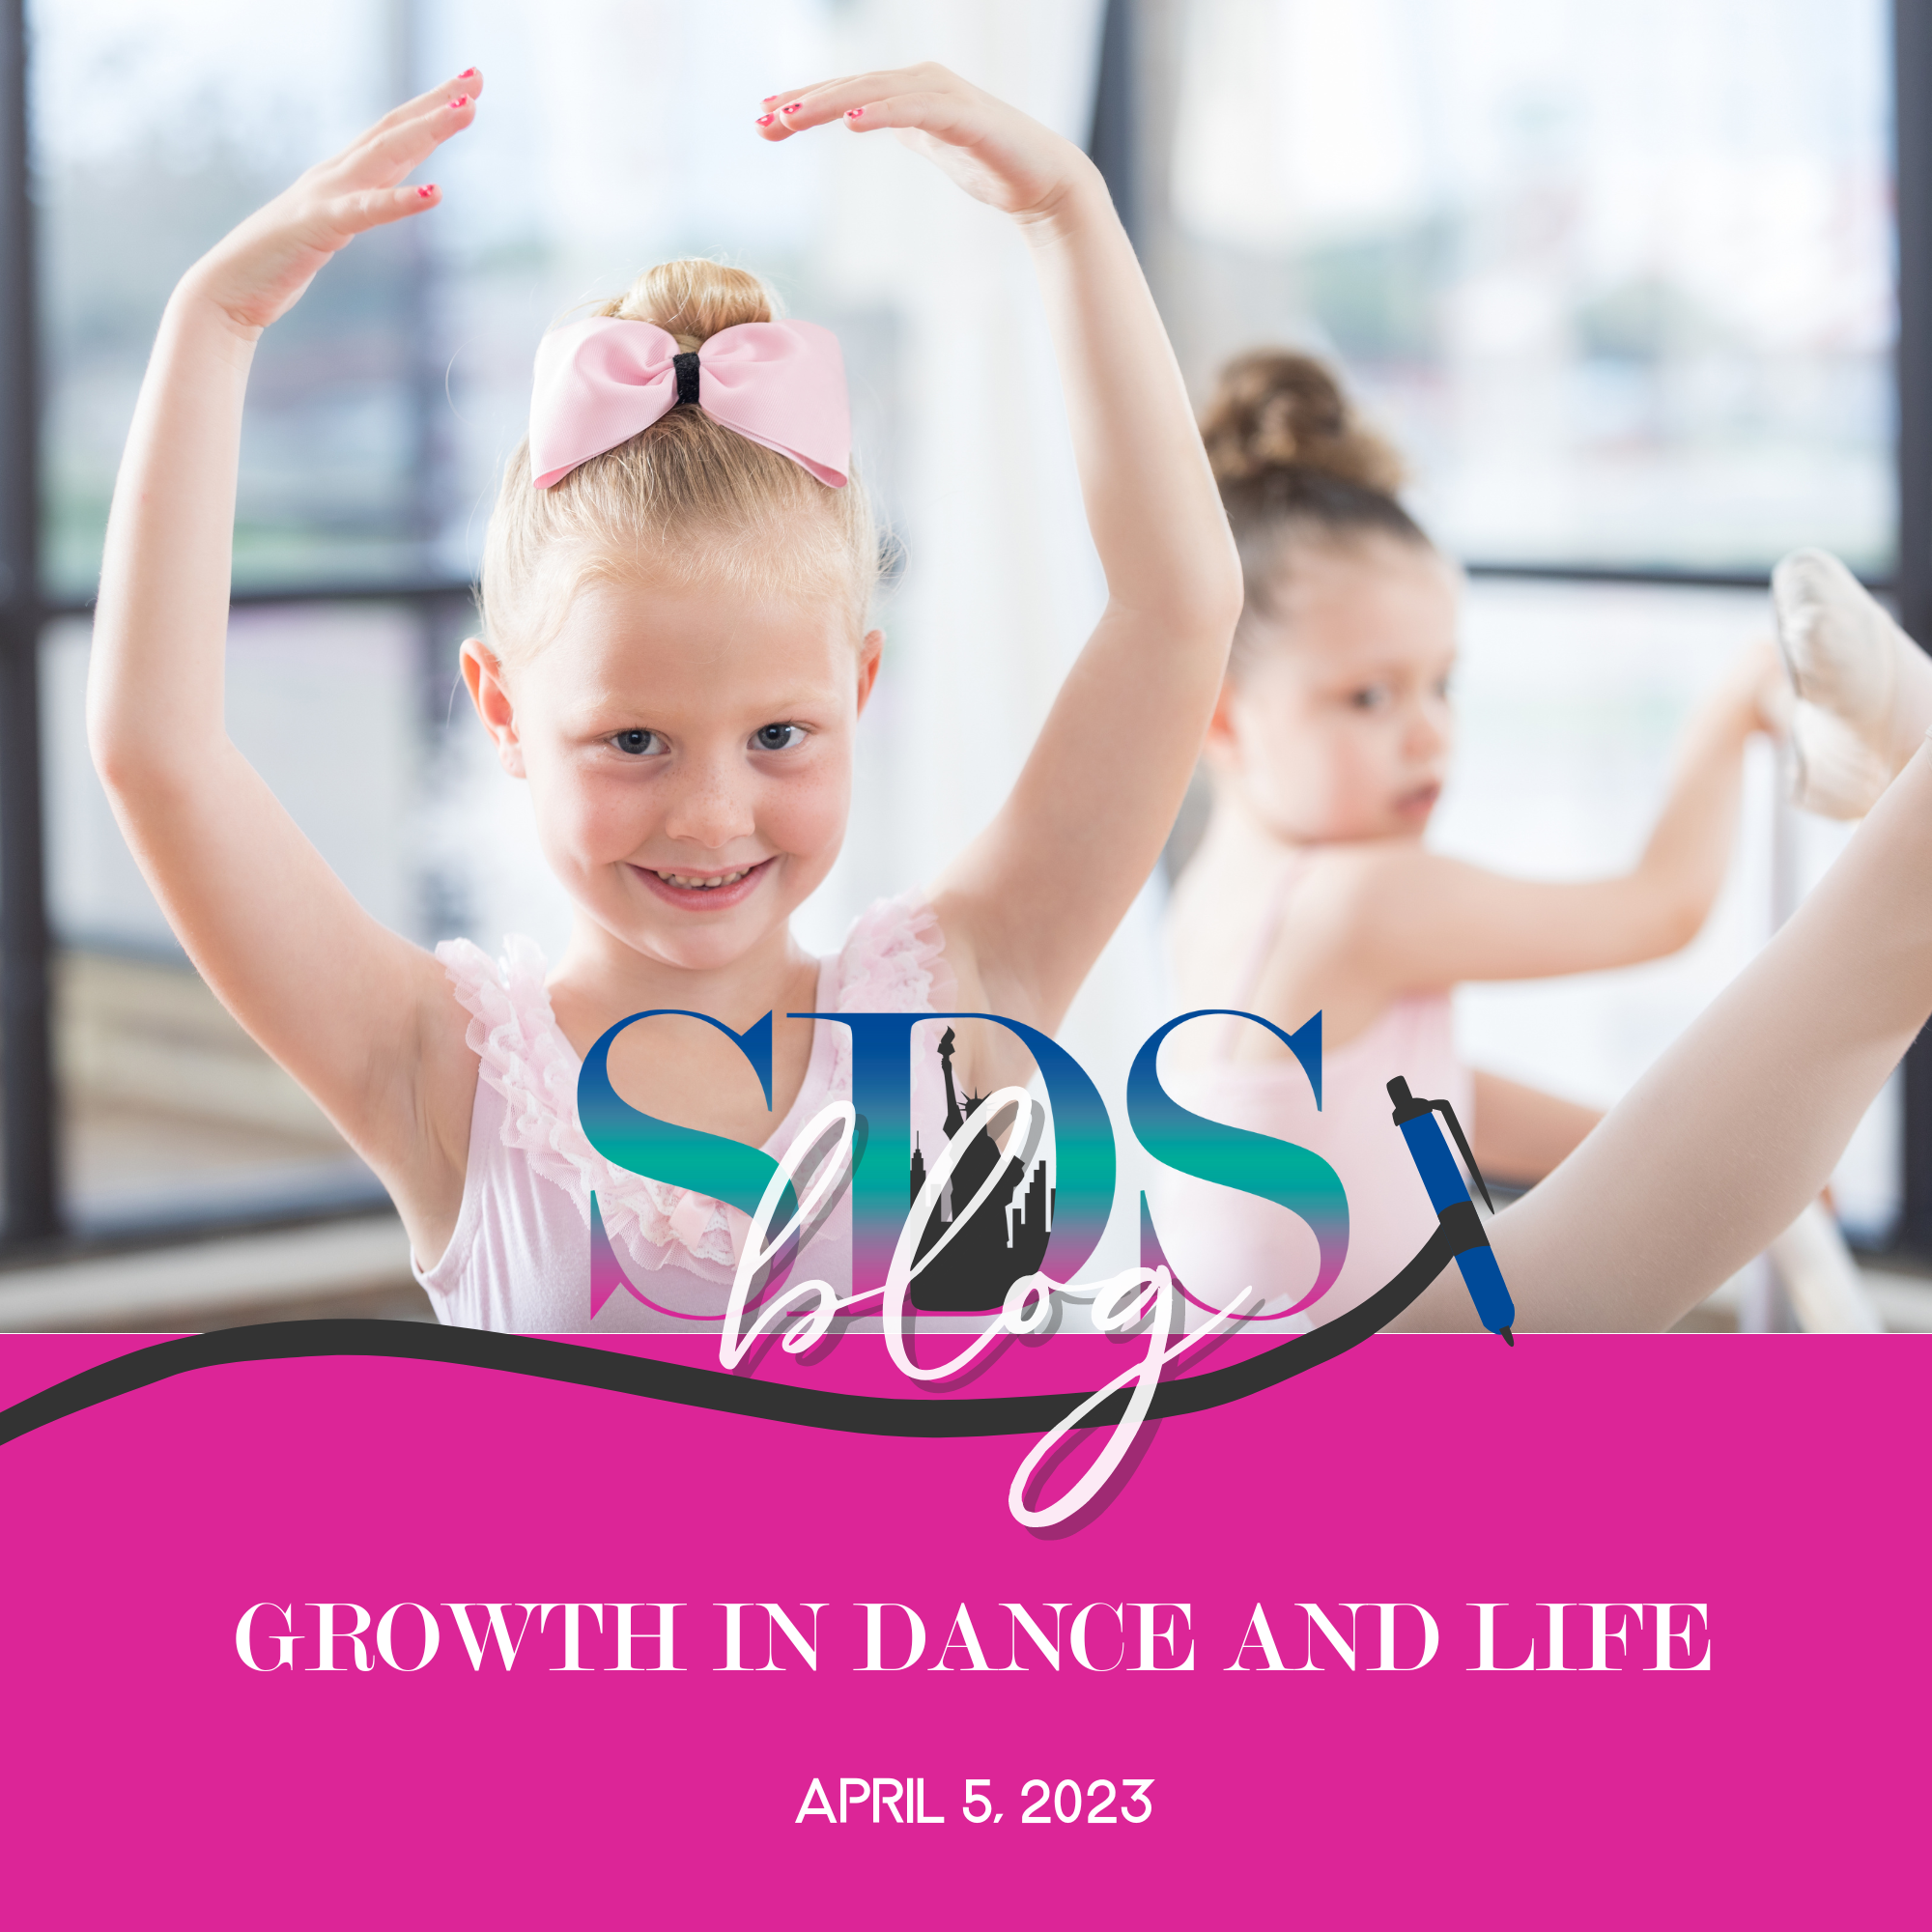 Growth in Dance and Life